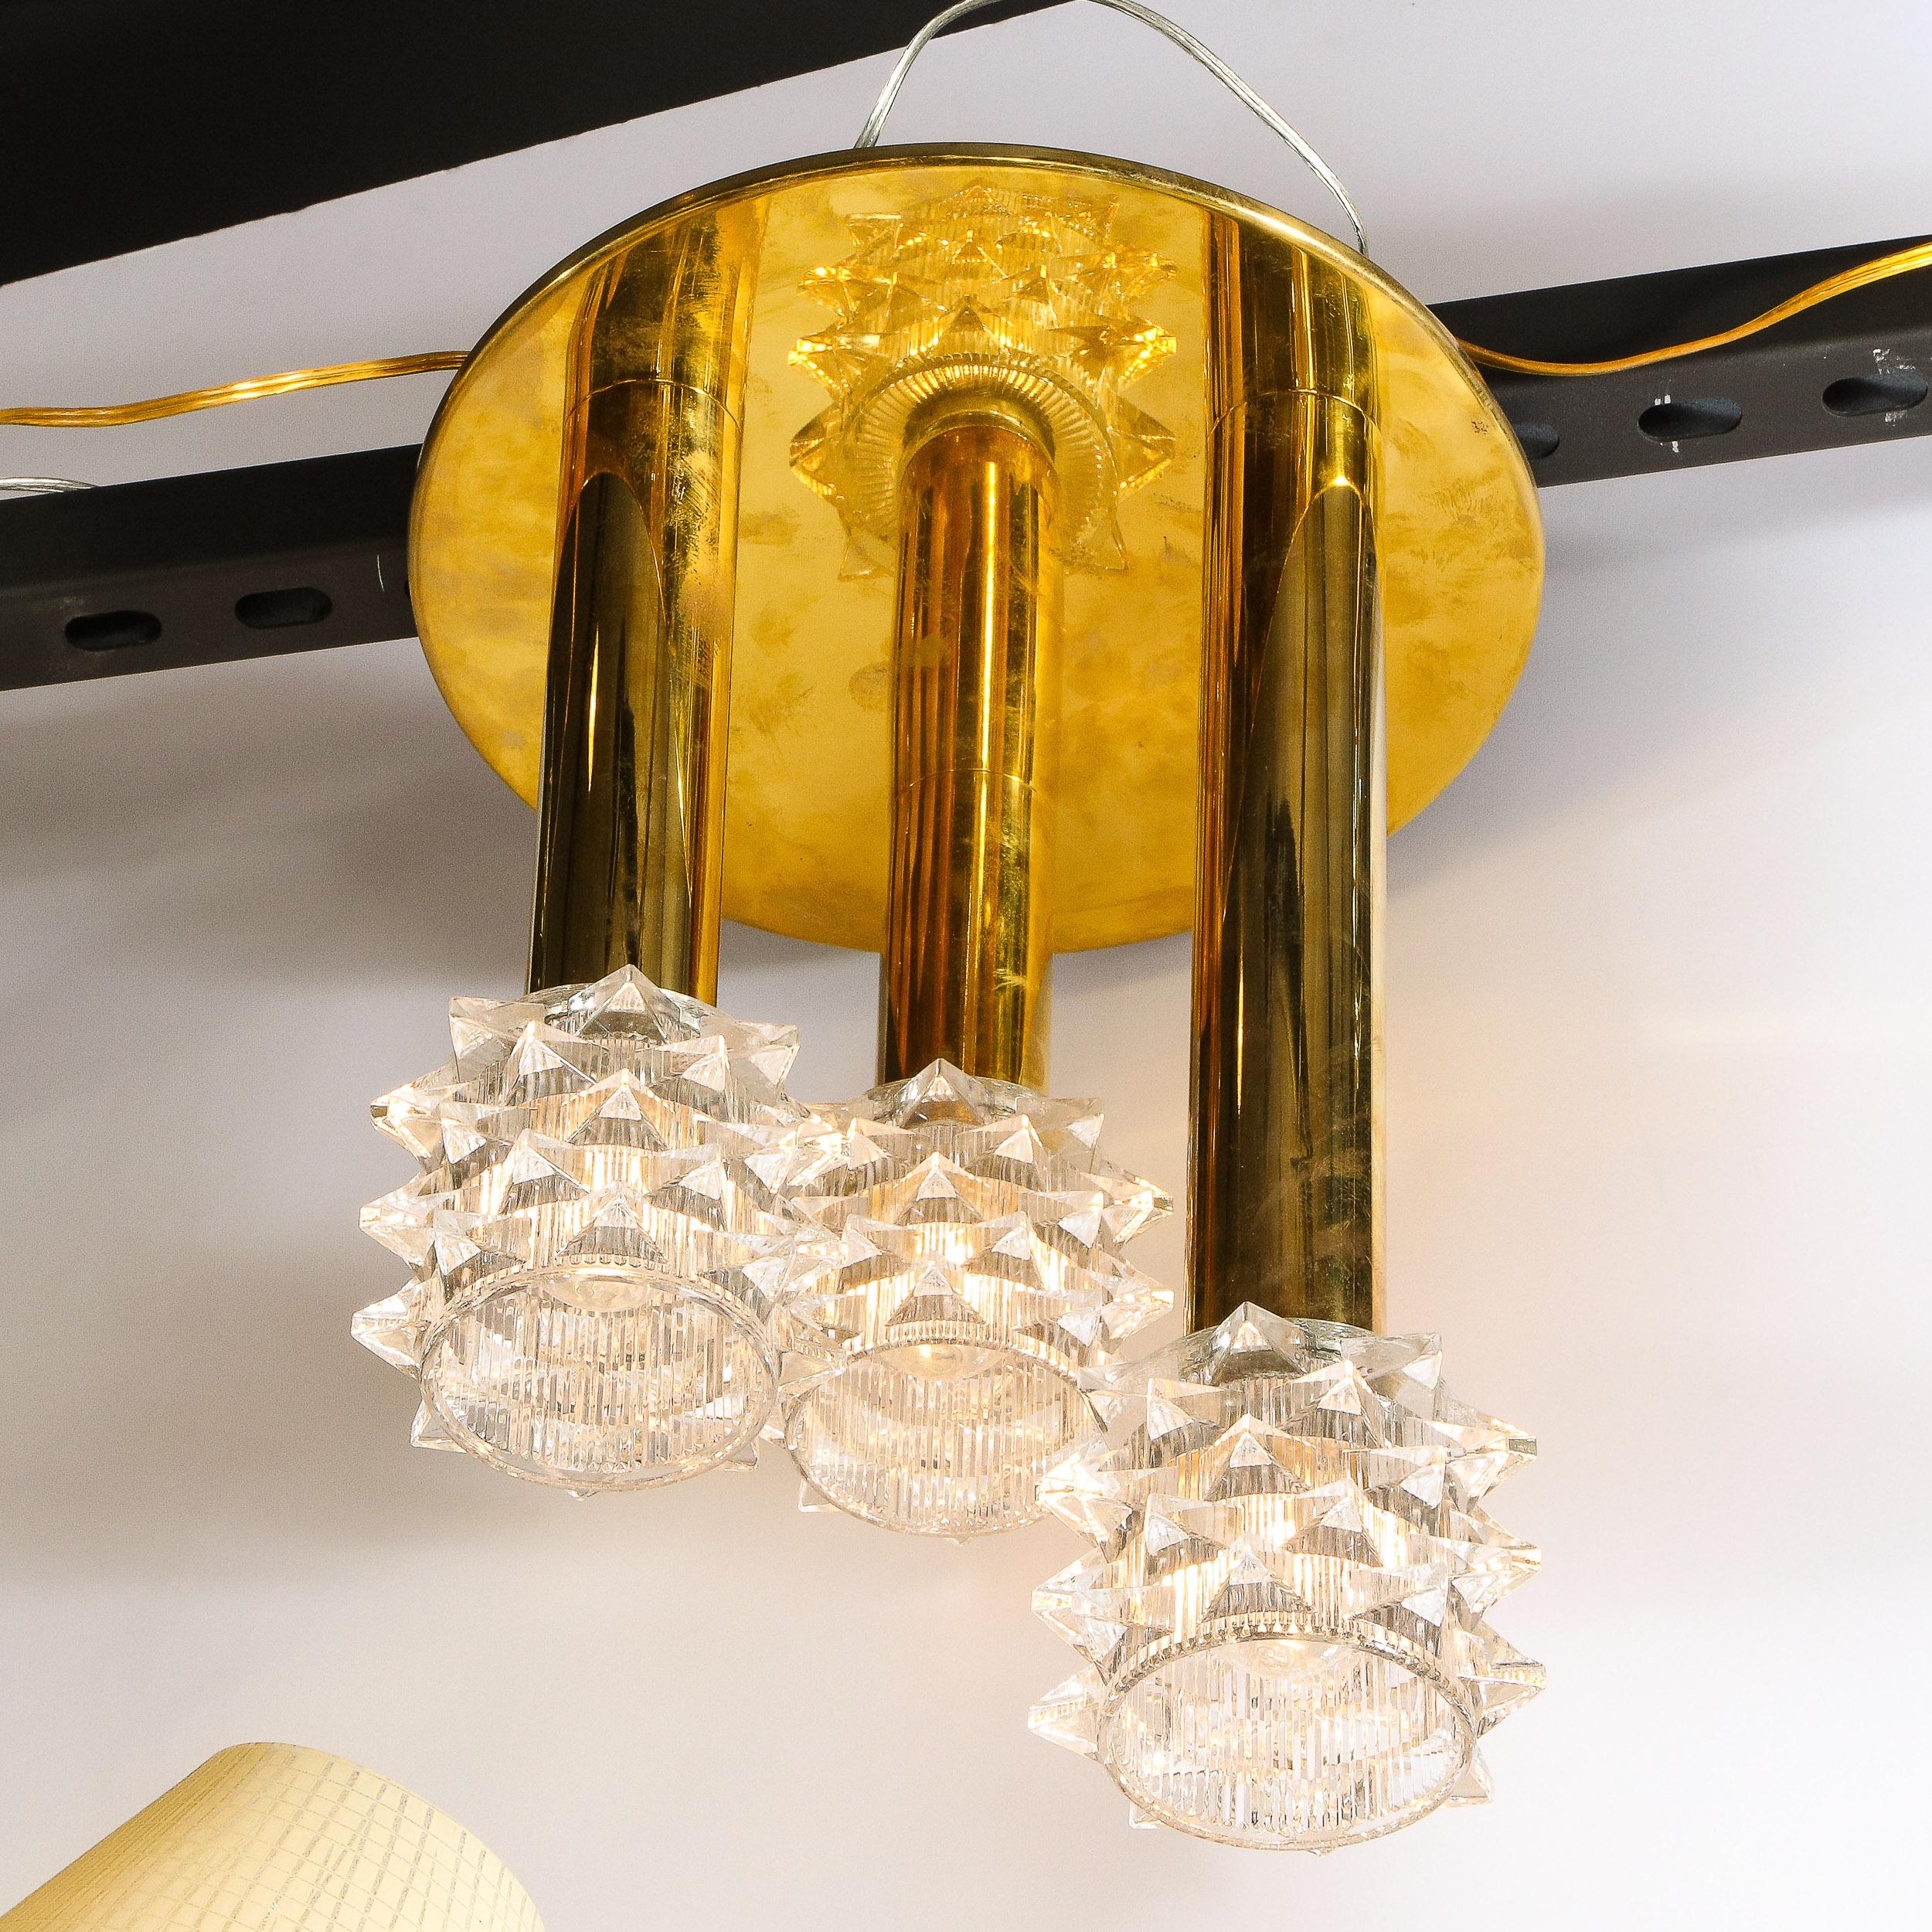 This sophisticated Mid-Century Modern flush mount chandelier was realized in Germany, circa 1970. It features three staggered cylindrical arms that descend from a circular base all in polished brass. The arms attach to cylindrical shades in